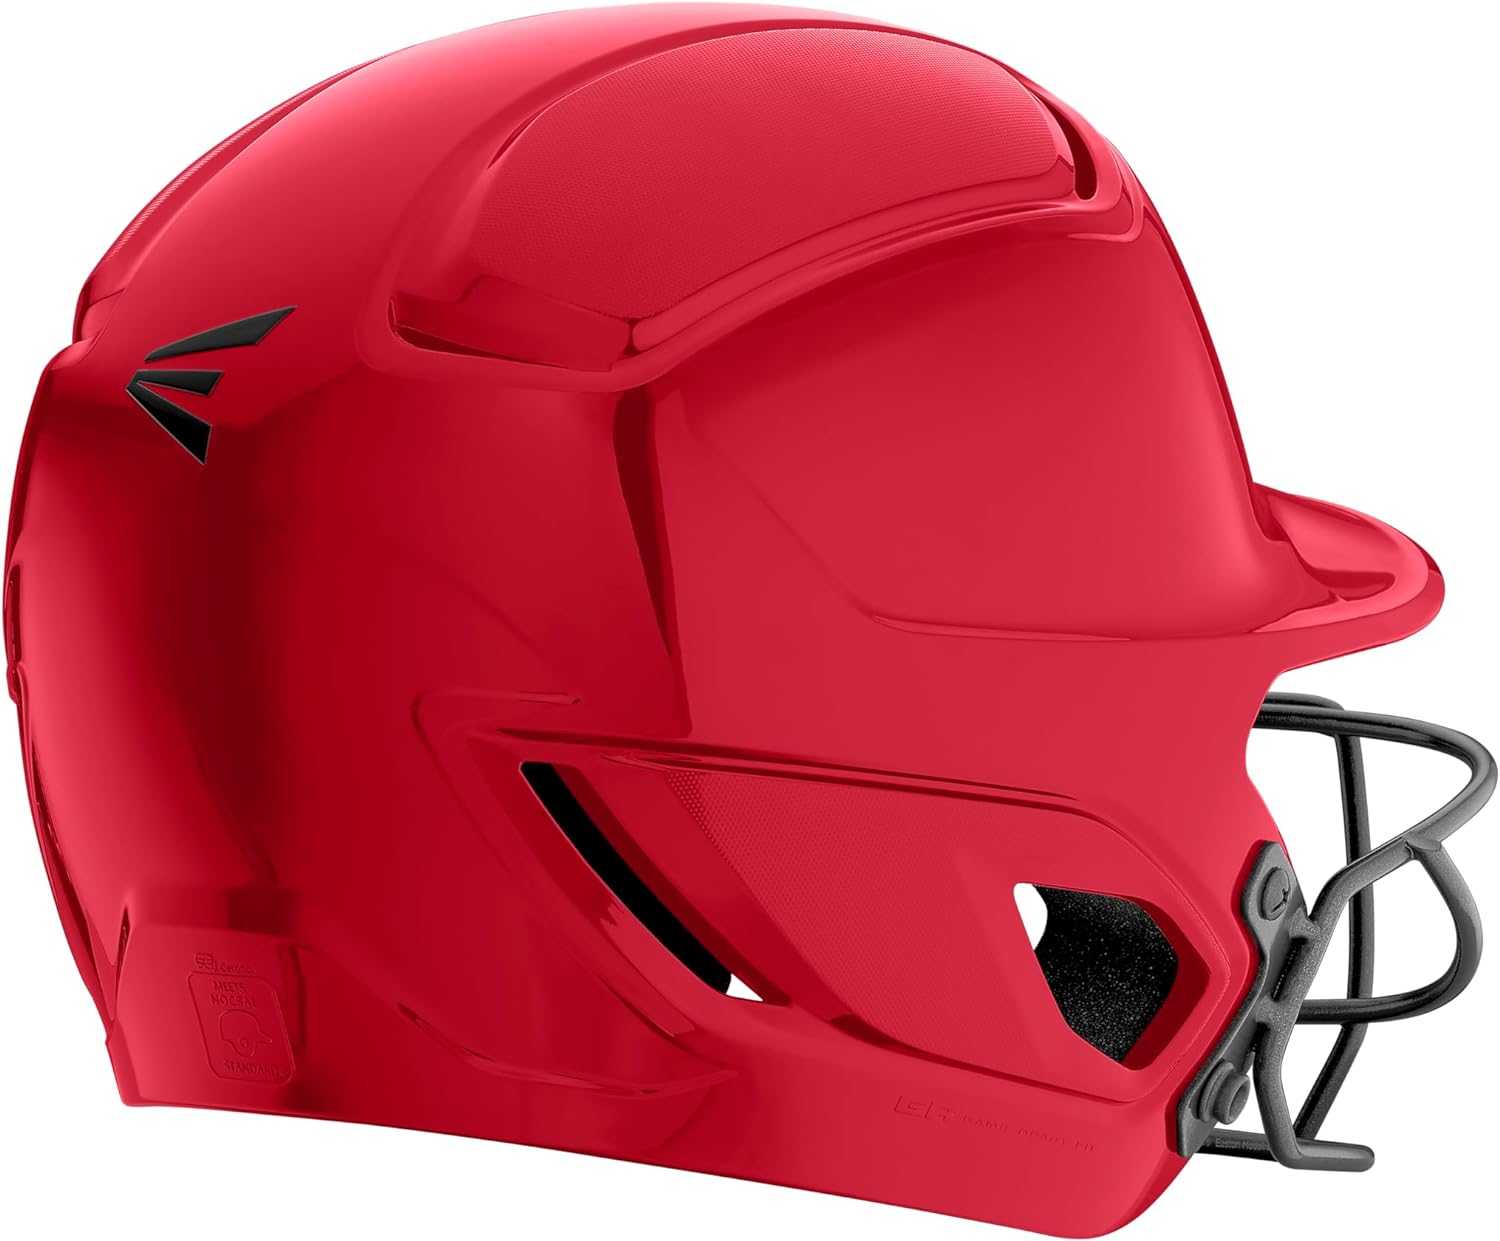 Easton Alpha 3.0 Solid Helmet with Softball Facemask ALPBSB3 - Red - HIT a Double - 1